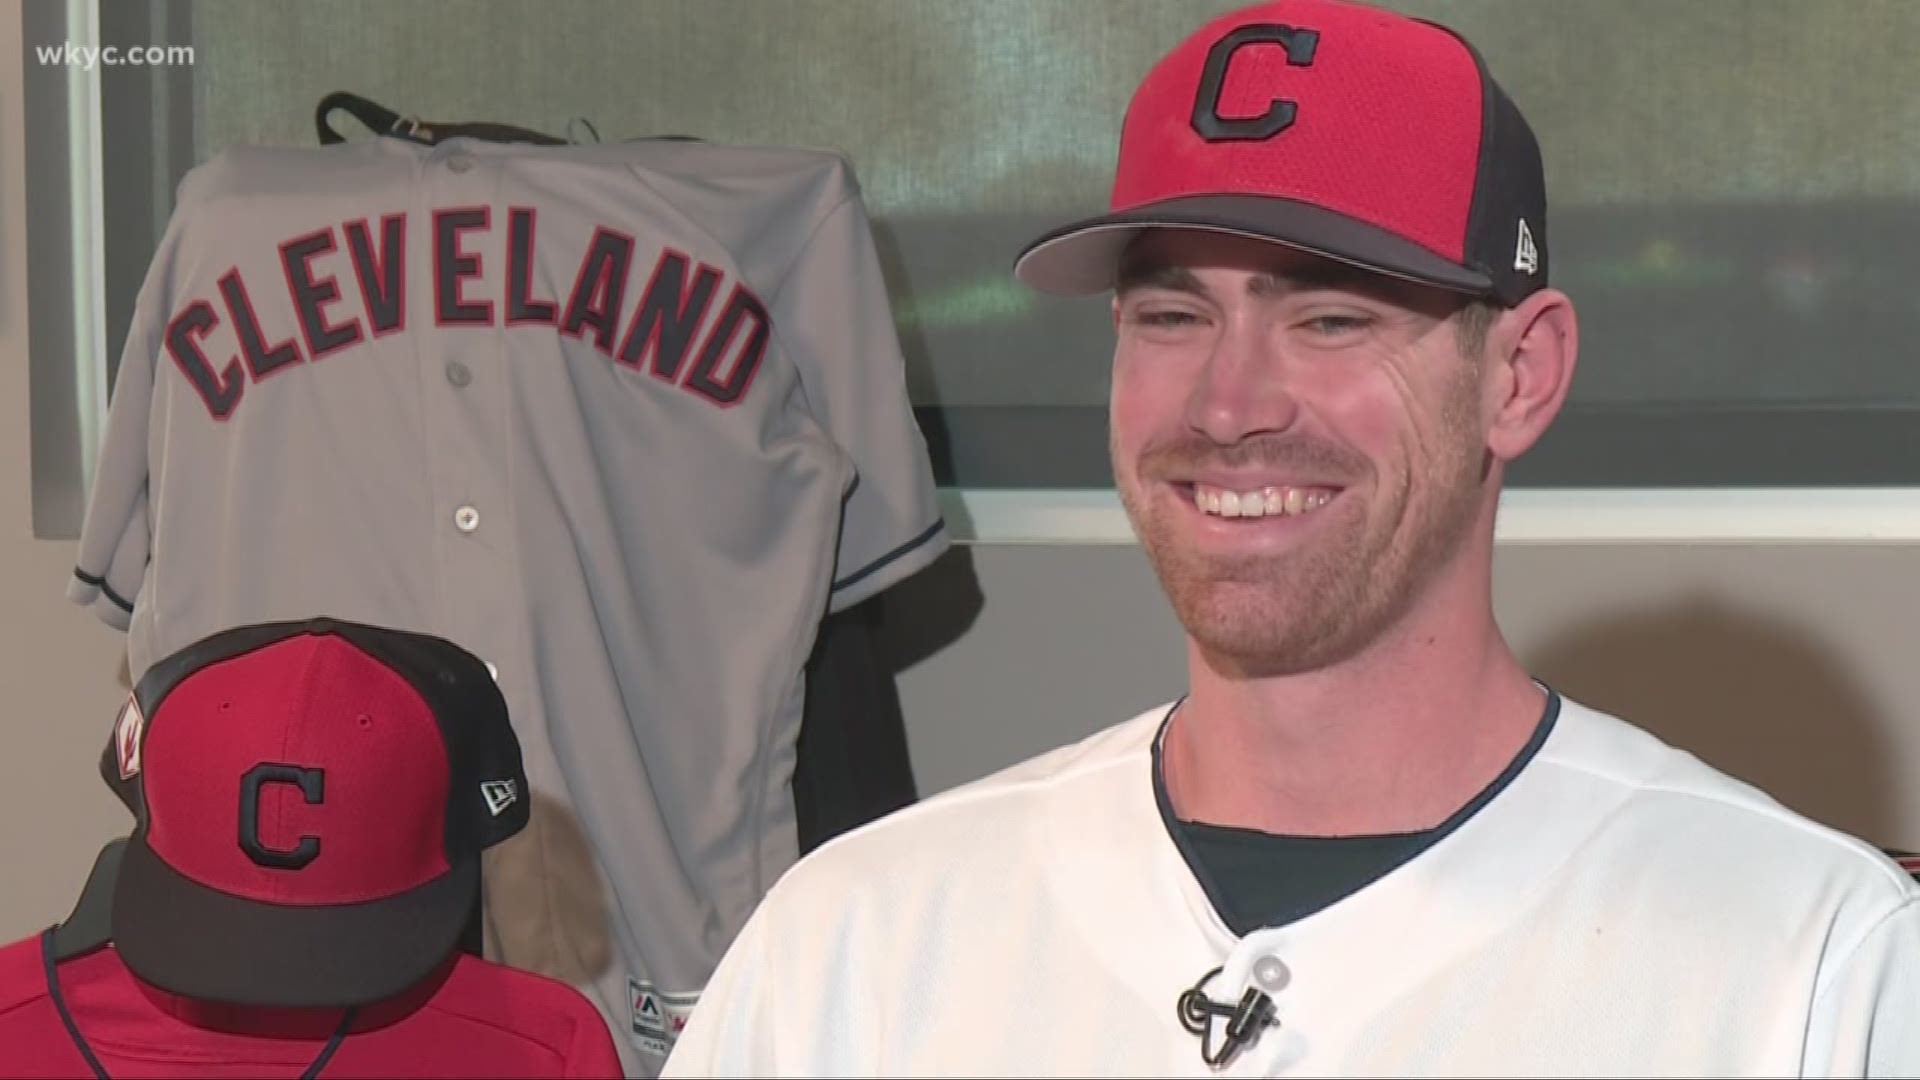 June 10, 2019: Get to know more about Shane Bieber as we go 'Beyond the Dugout' with the Cleveland Indians starting pitcher. During our conversation, he revealed the biggest regret in his life and explained what his perfect vacation would be.